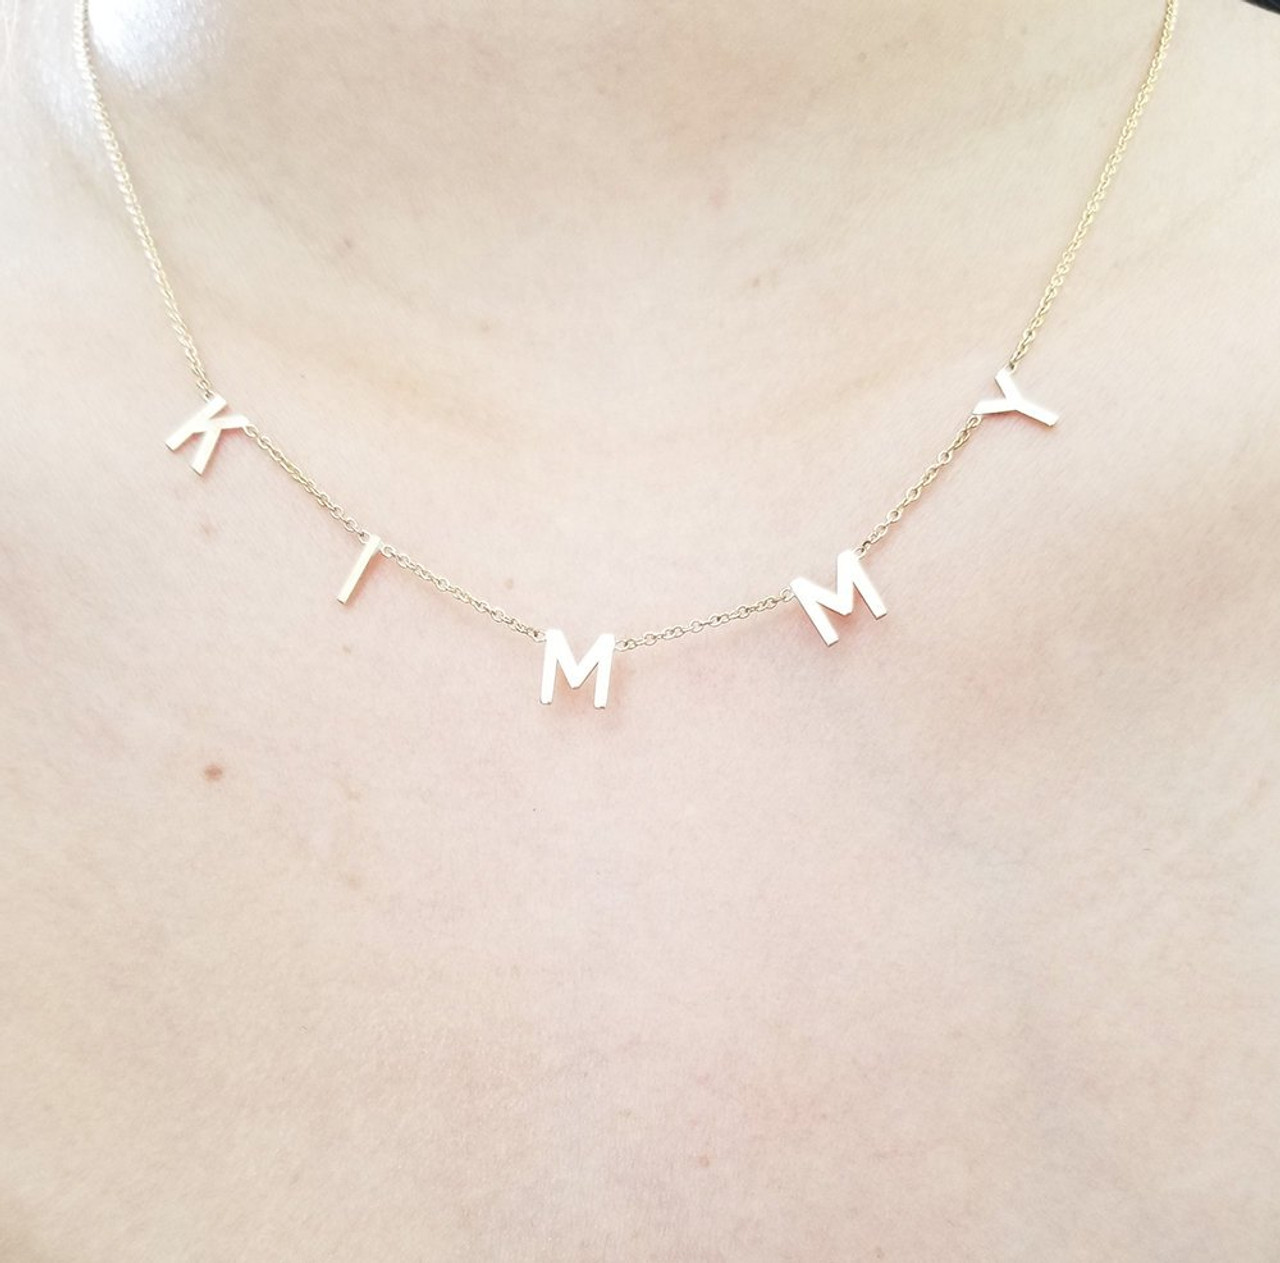 Dainty Gold Plated Initial Necklace – JOY by Corrine Smith